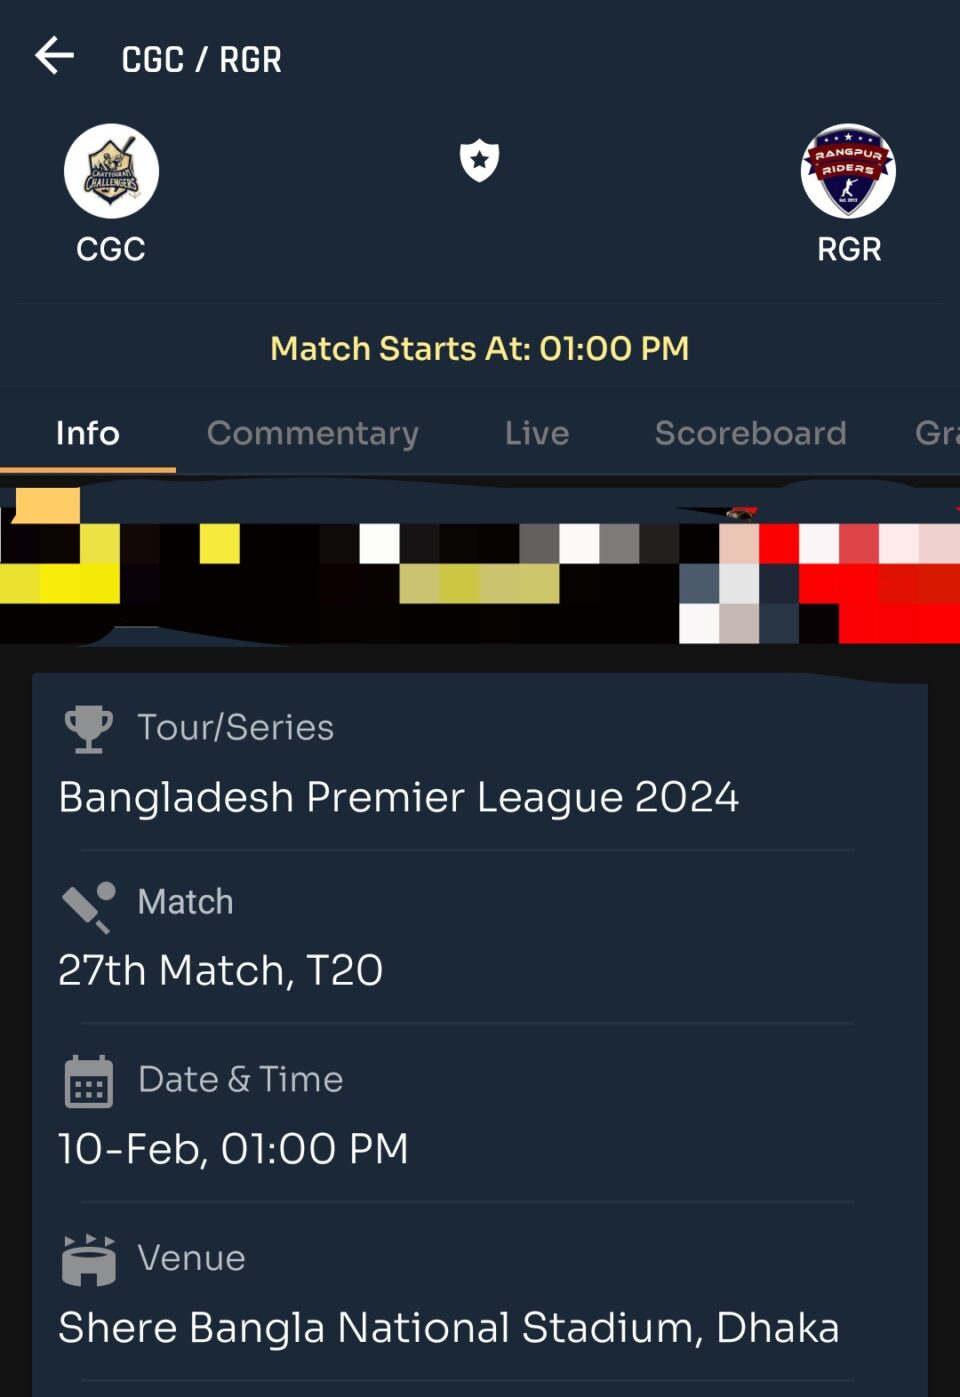 Today BPL Prediction |Match Number 27 CGC vs RGR| Toss and Match Analysis | Pitch & Weather Report